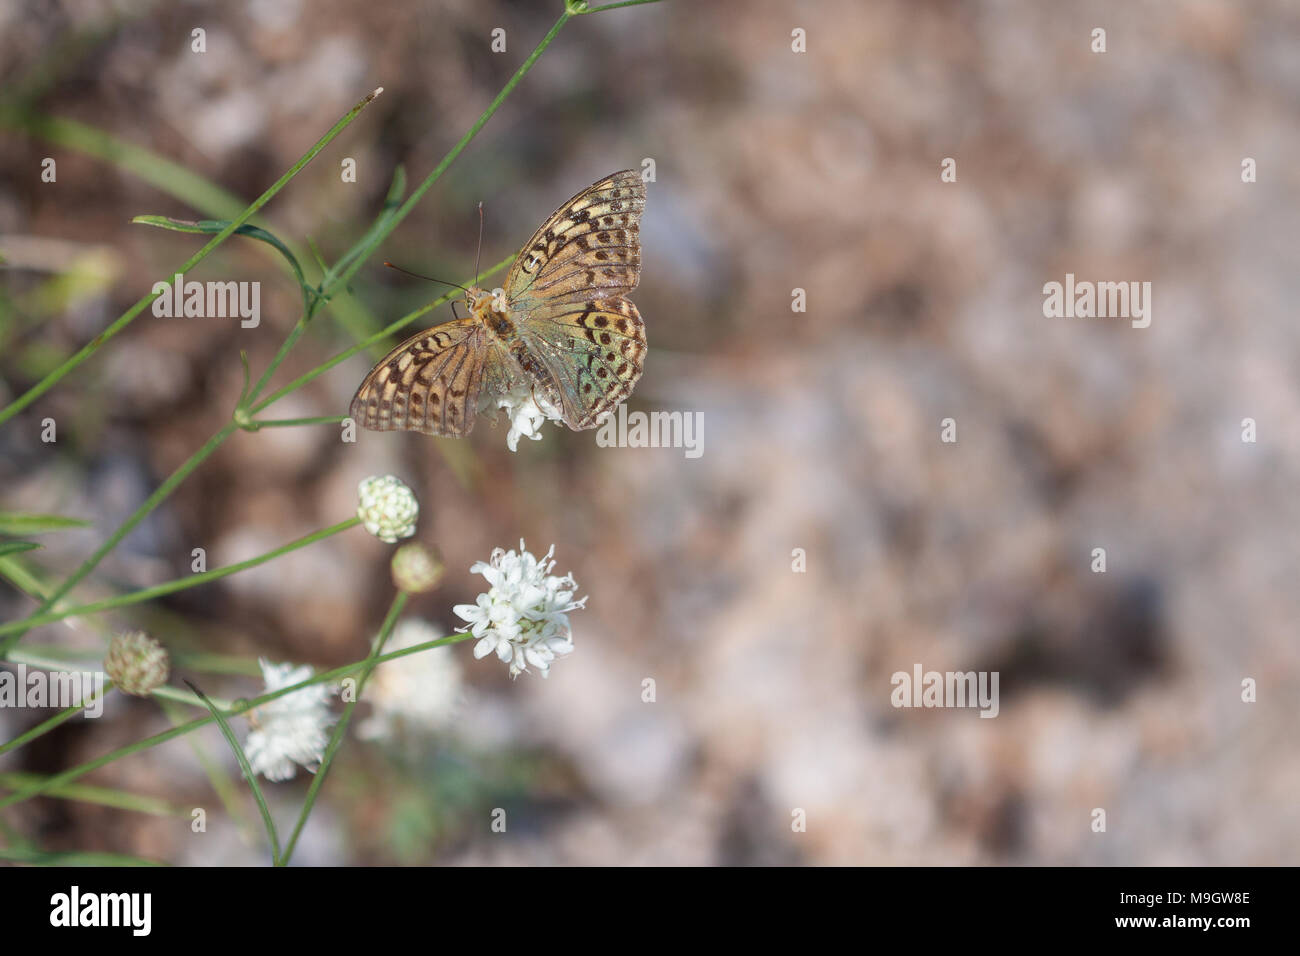 Silver-Washed Fritillary Butterfly with Broken Wing Stock Photo